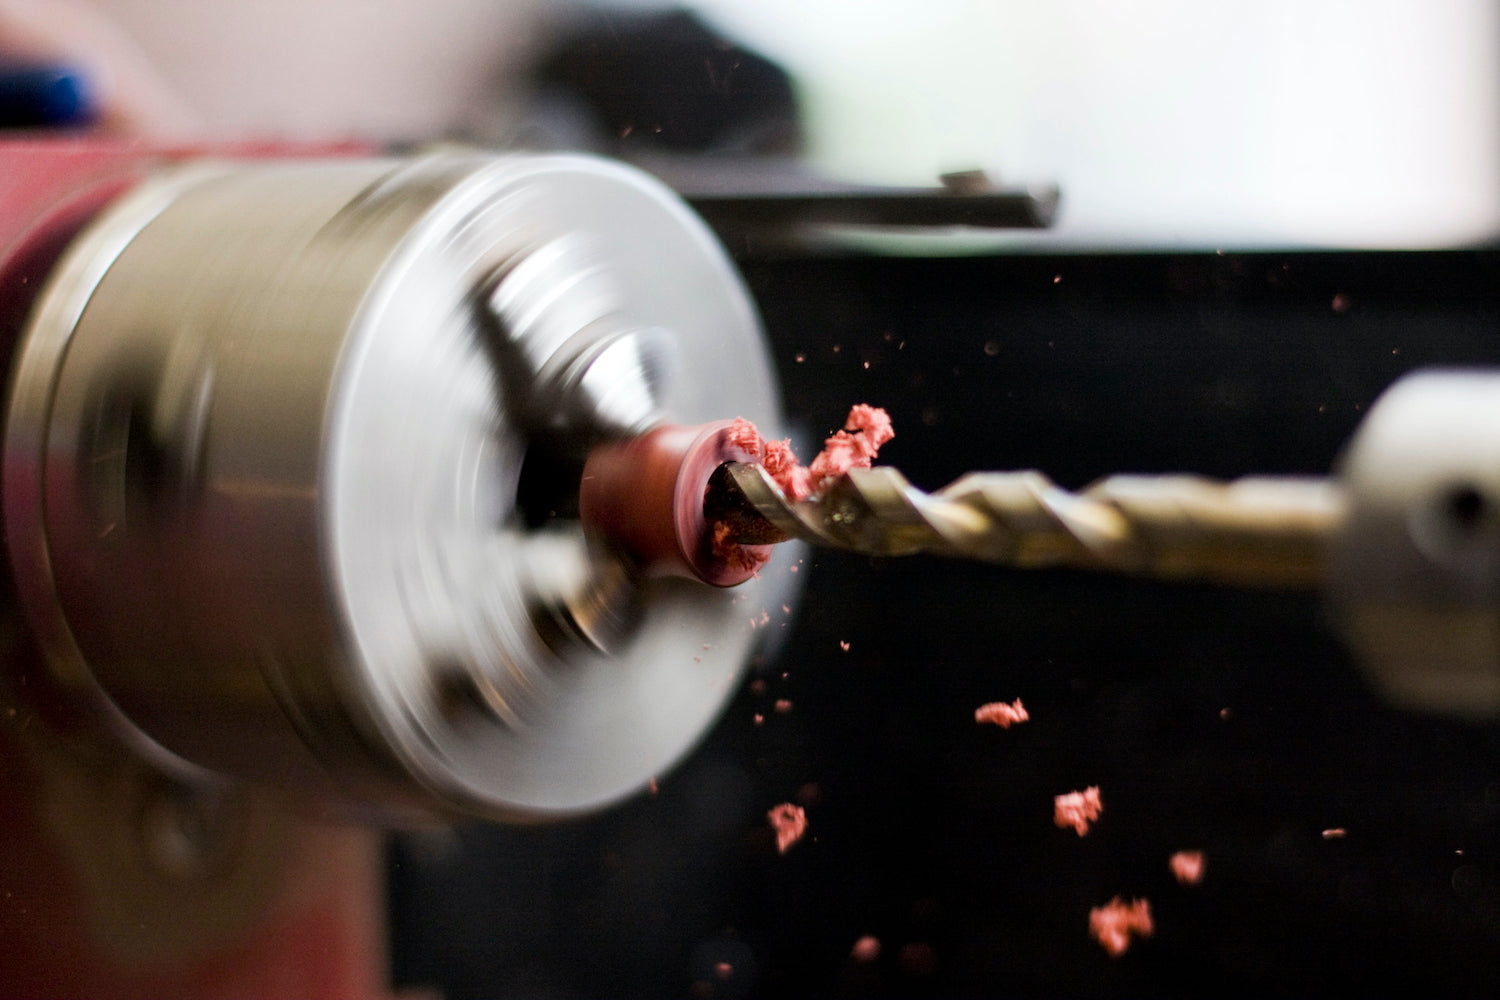 Lathe spinning while a drill bit is drilling into a wood ear plug. 